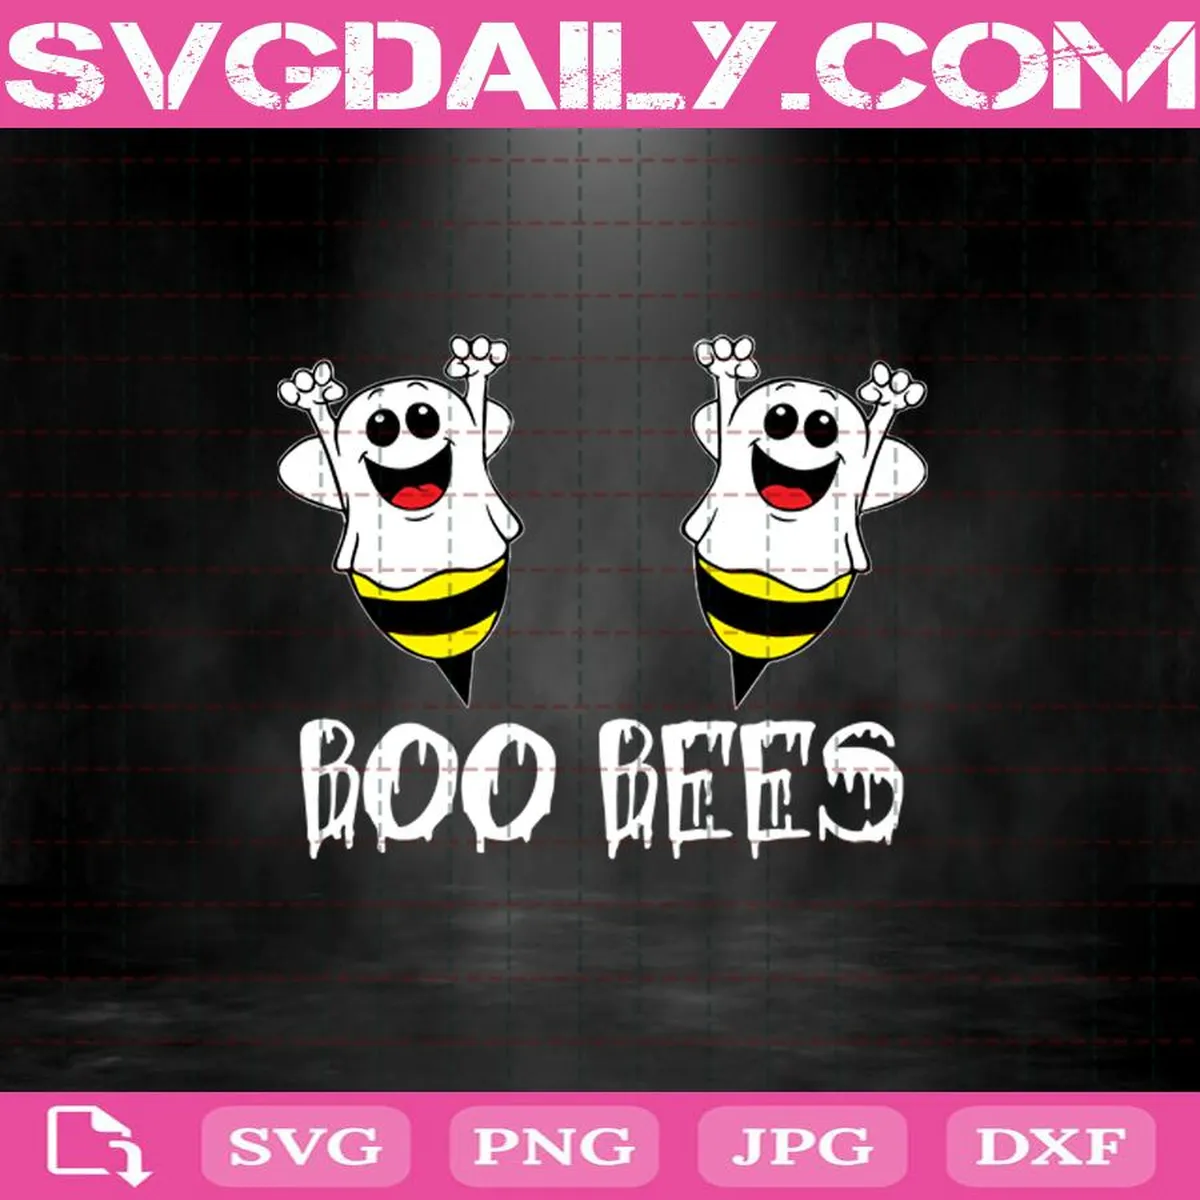 Boo Bees Svg, Halloween Svg, Bee Svg, Ghost Svg, Ghost Svg, Boo Svg, Bee Funny Svg, Horror Svg